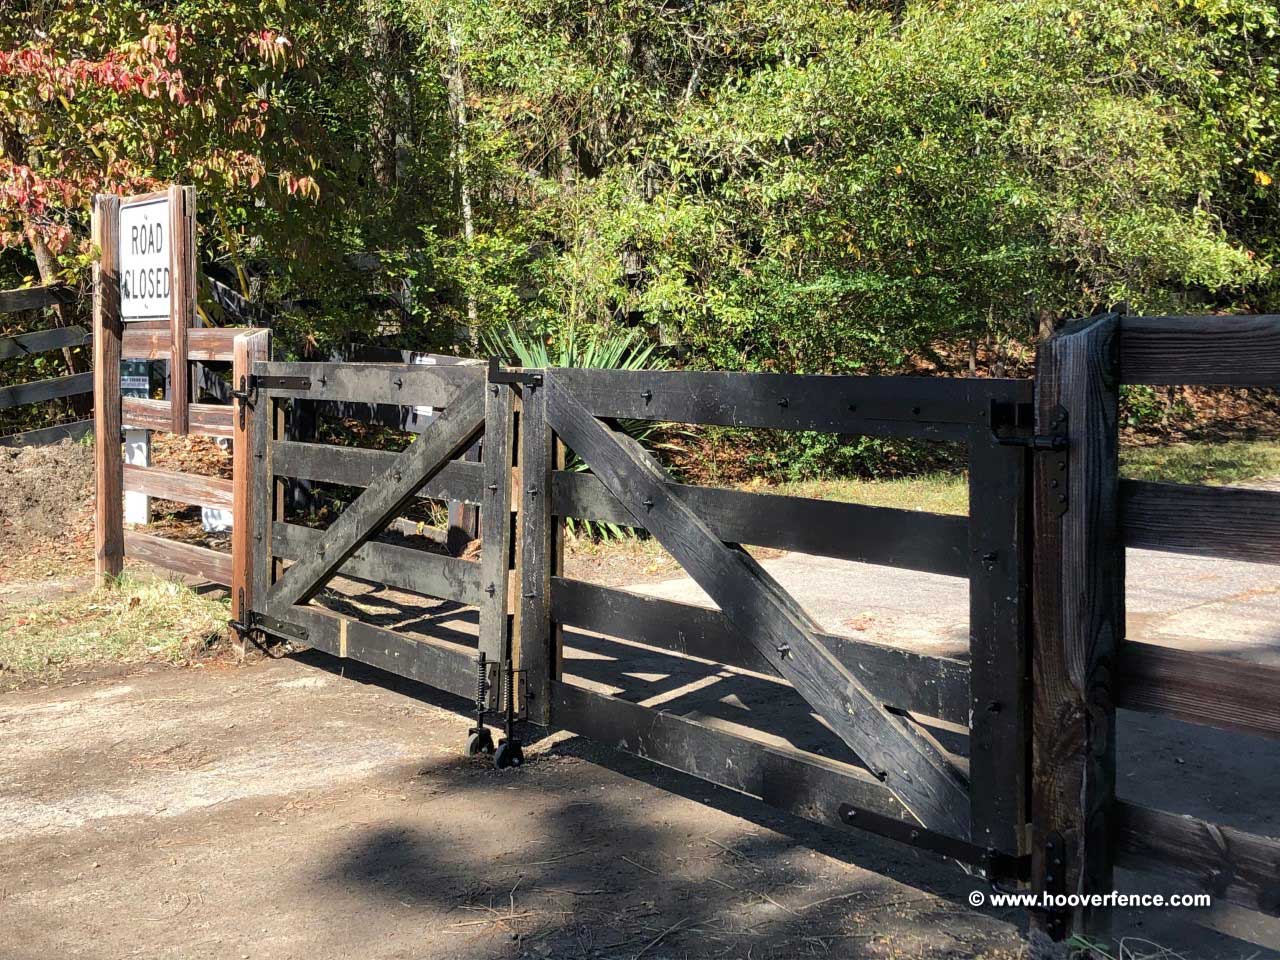 Customer Install - Wood Gate Installed Using Snug Cottage Hinges, Latch, Wheels, and Bolts